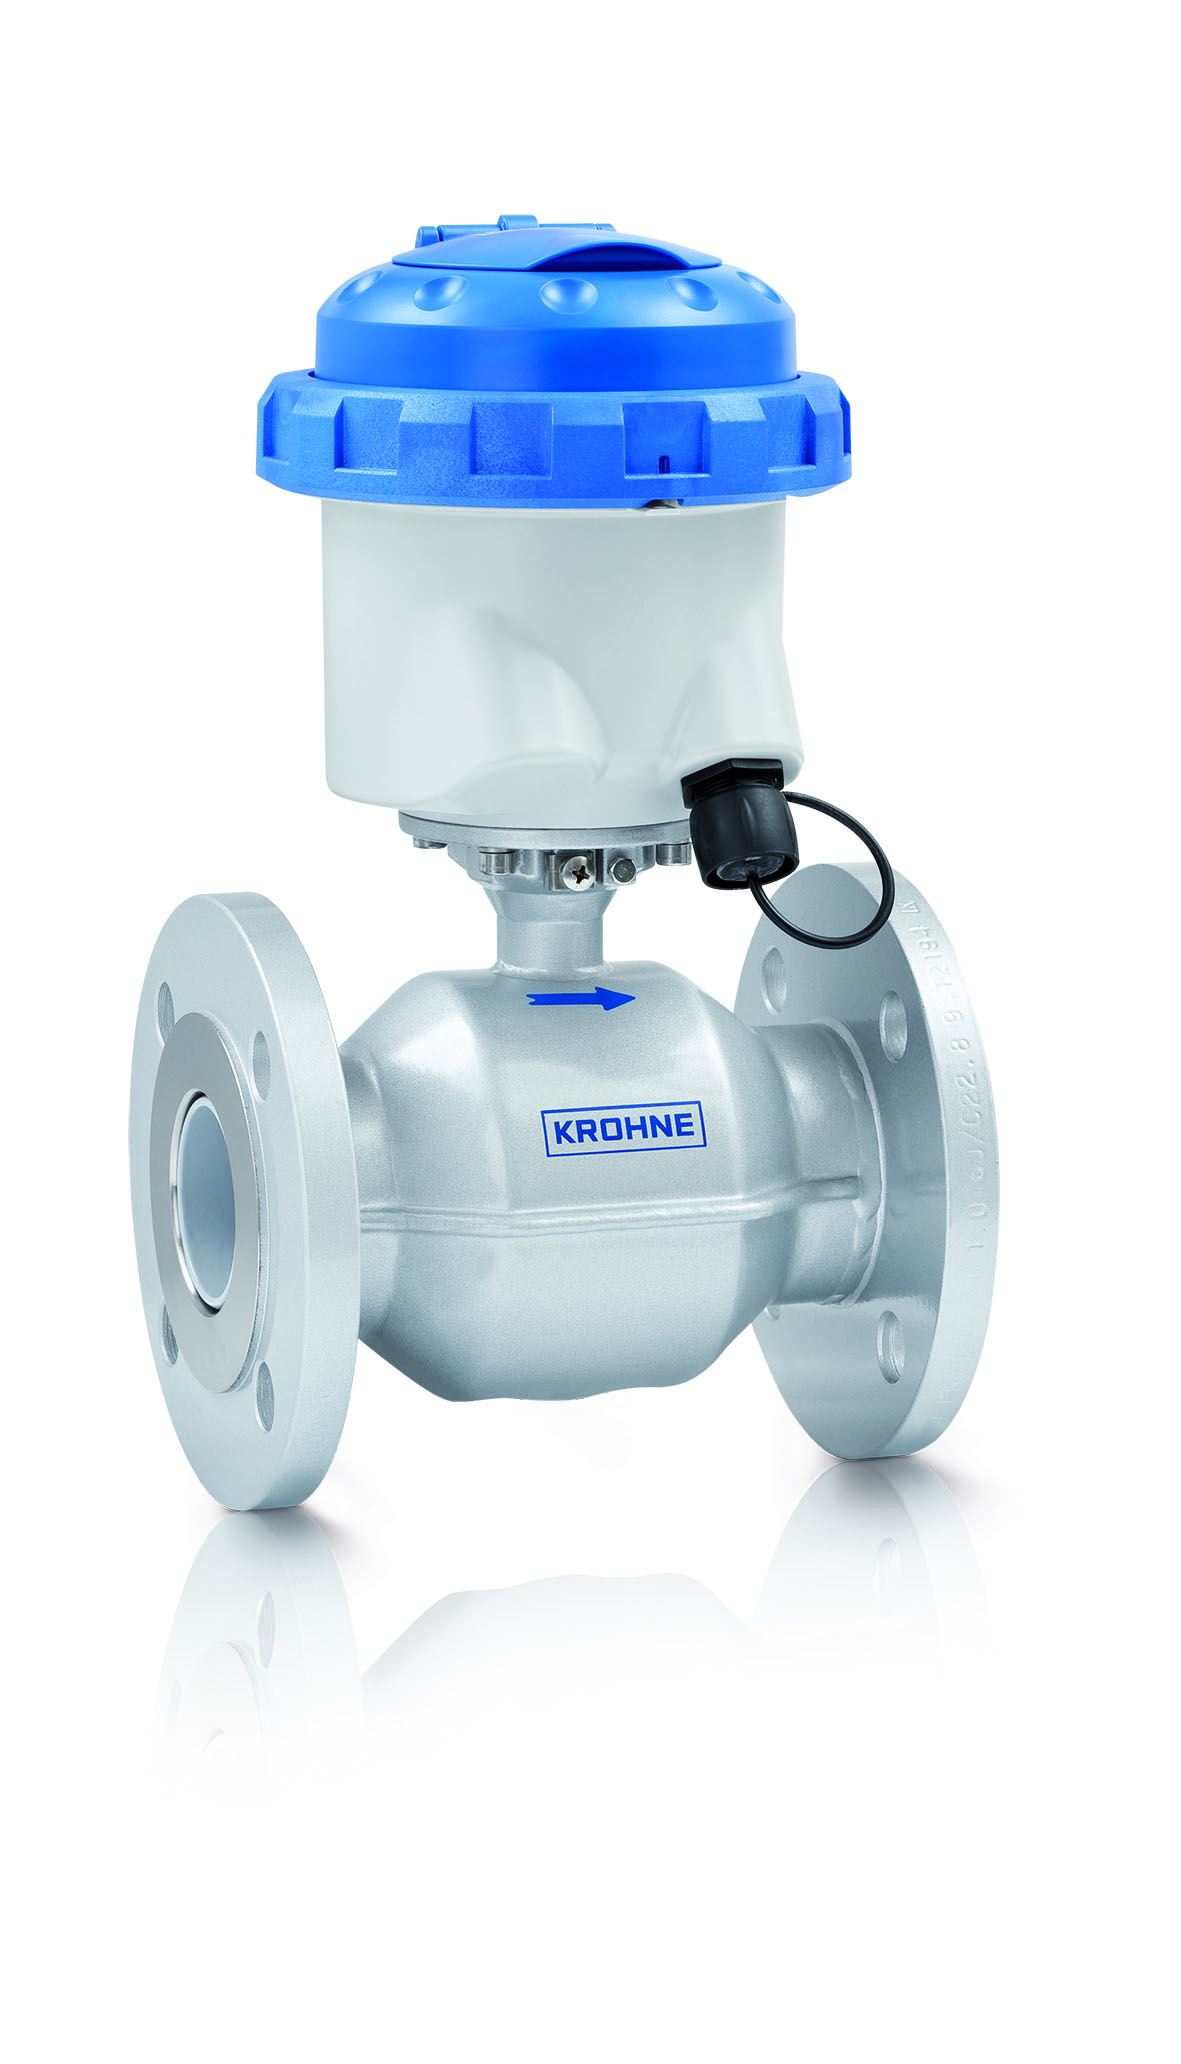 Krohne’s Waterflux 3070 battery-powered water meter will be manufactured at the company’s new facility in Beverly, MA.